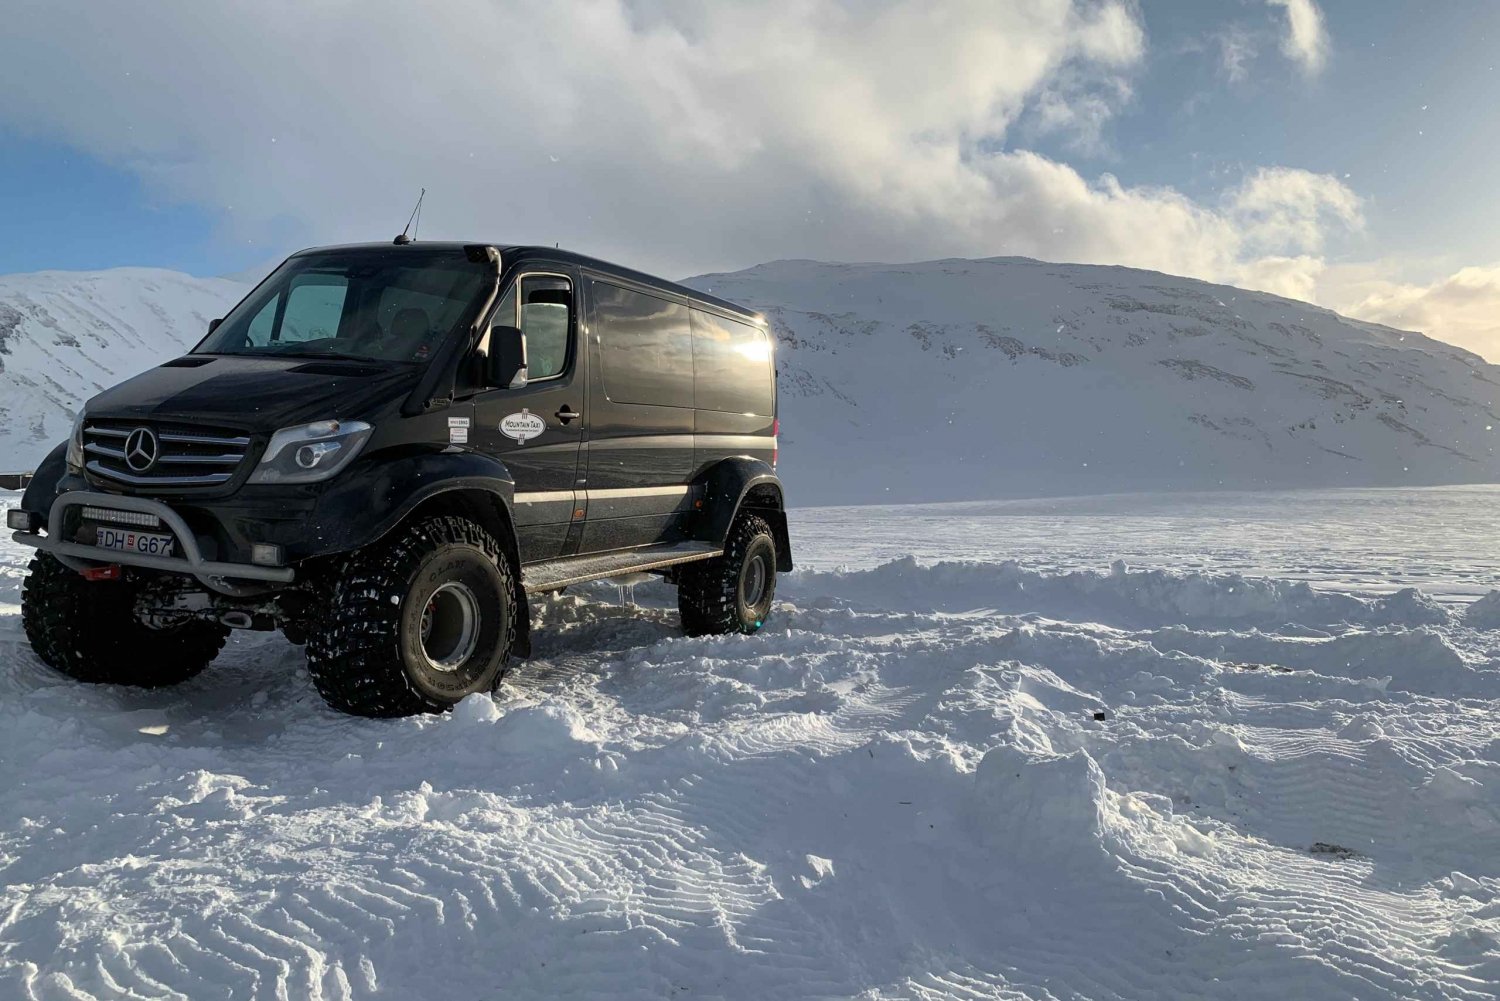 Iceland in a nutshell, private Super Jeep